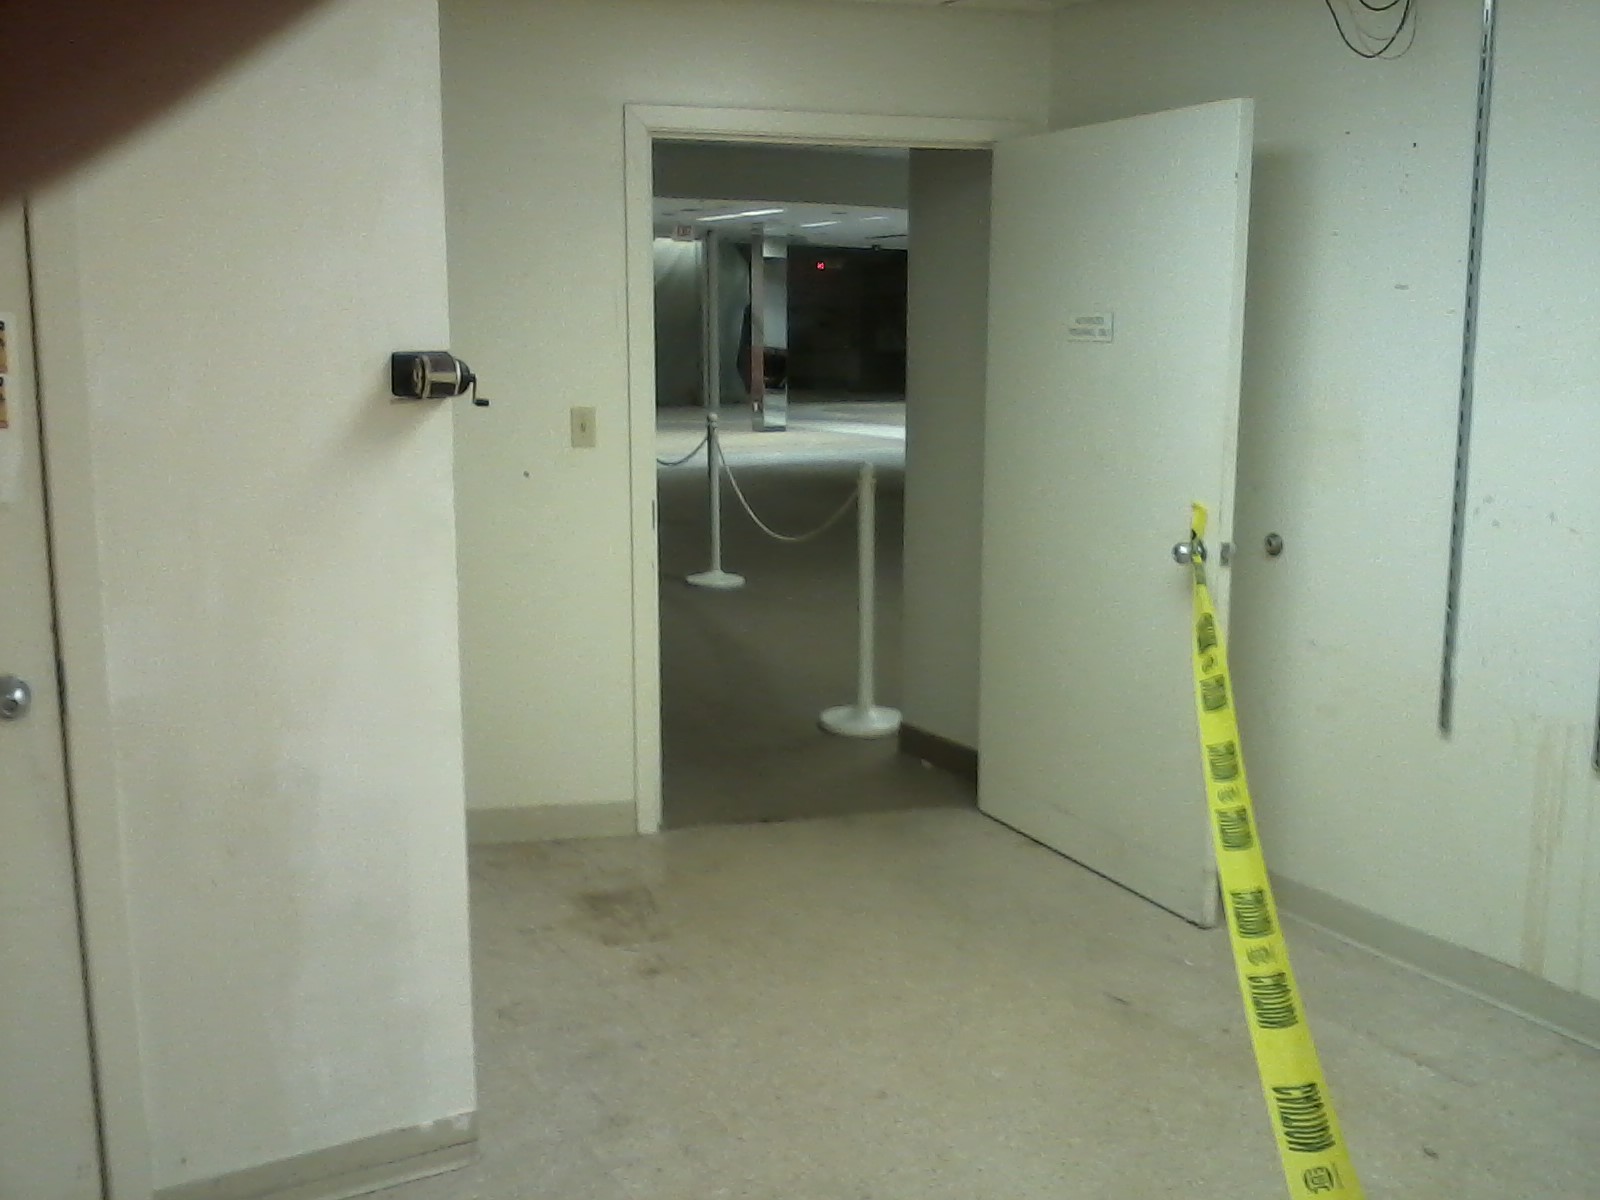 the open door of an empty room with yellow caution tape on the wall